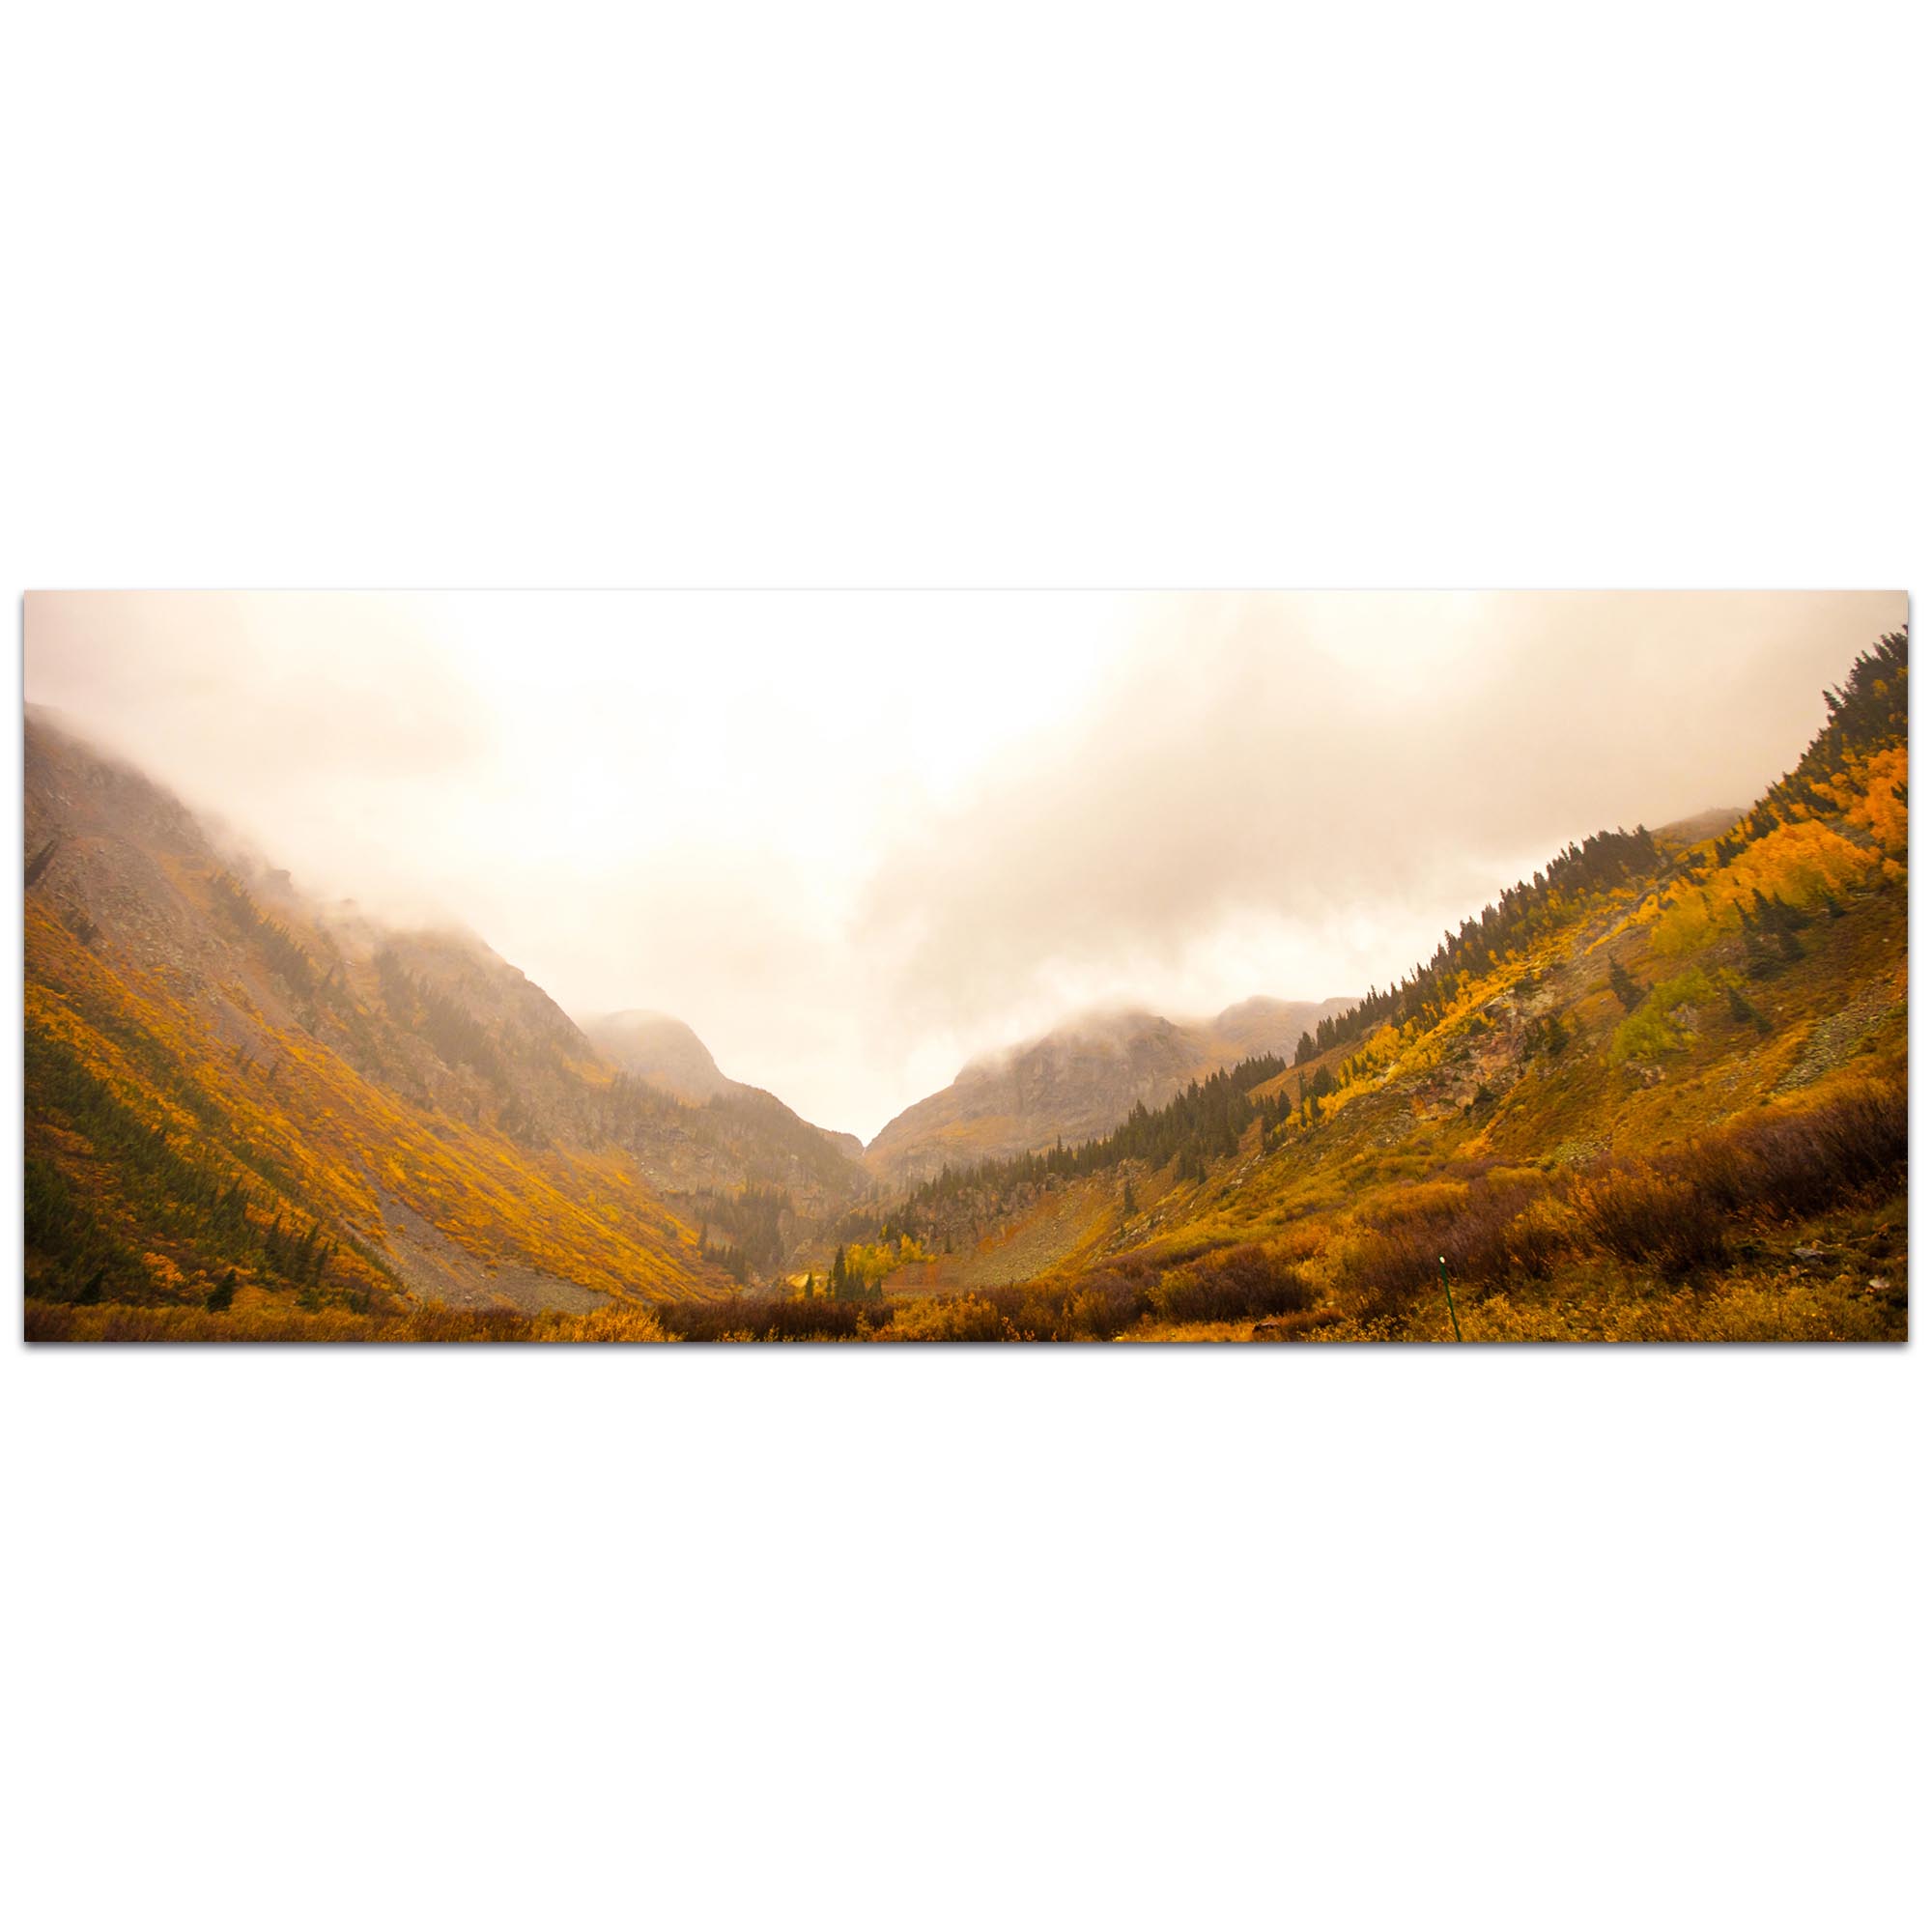 Landscape Photography 'Fog in the Canyon' - Autumn Nature Art on Metal or Plexiglass